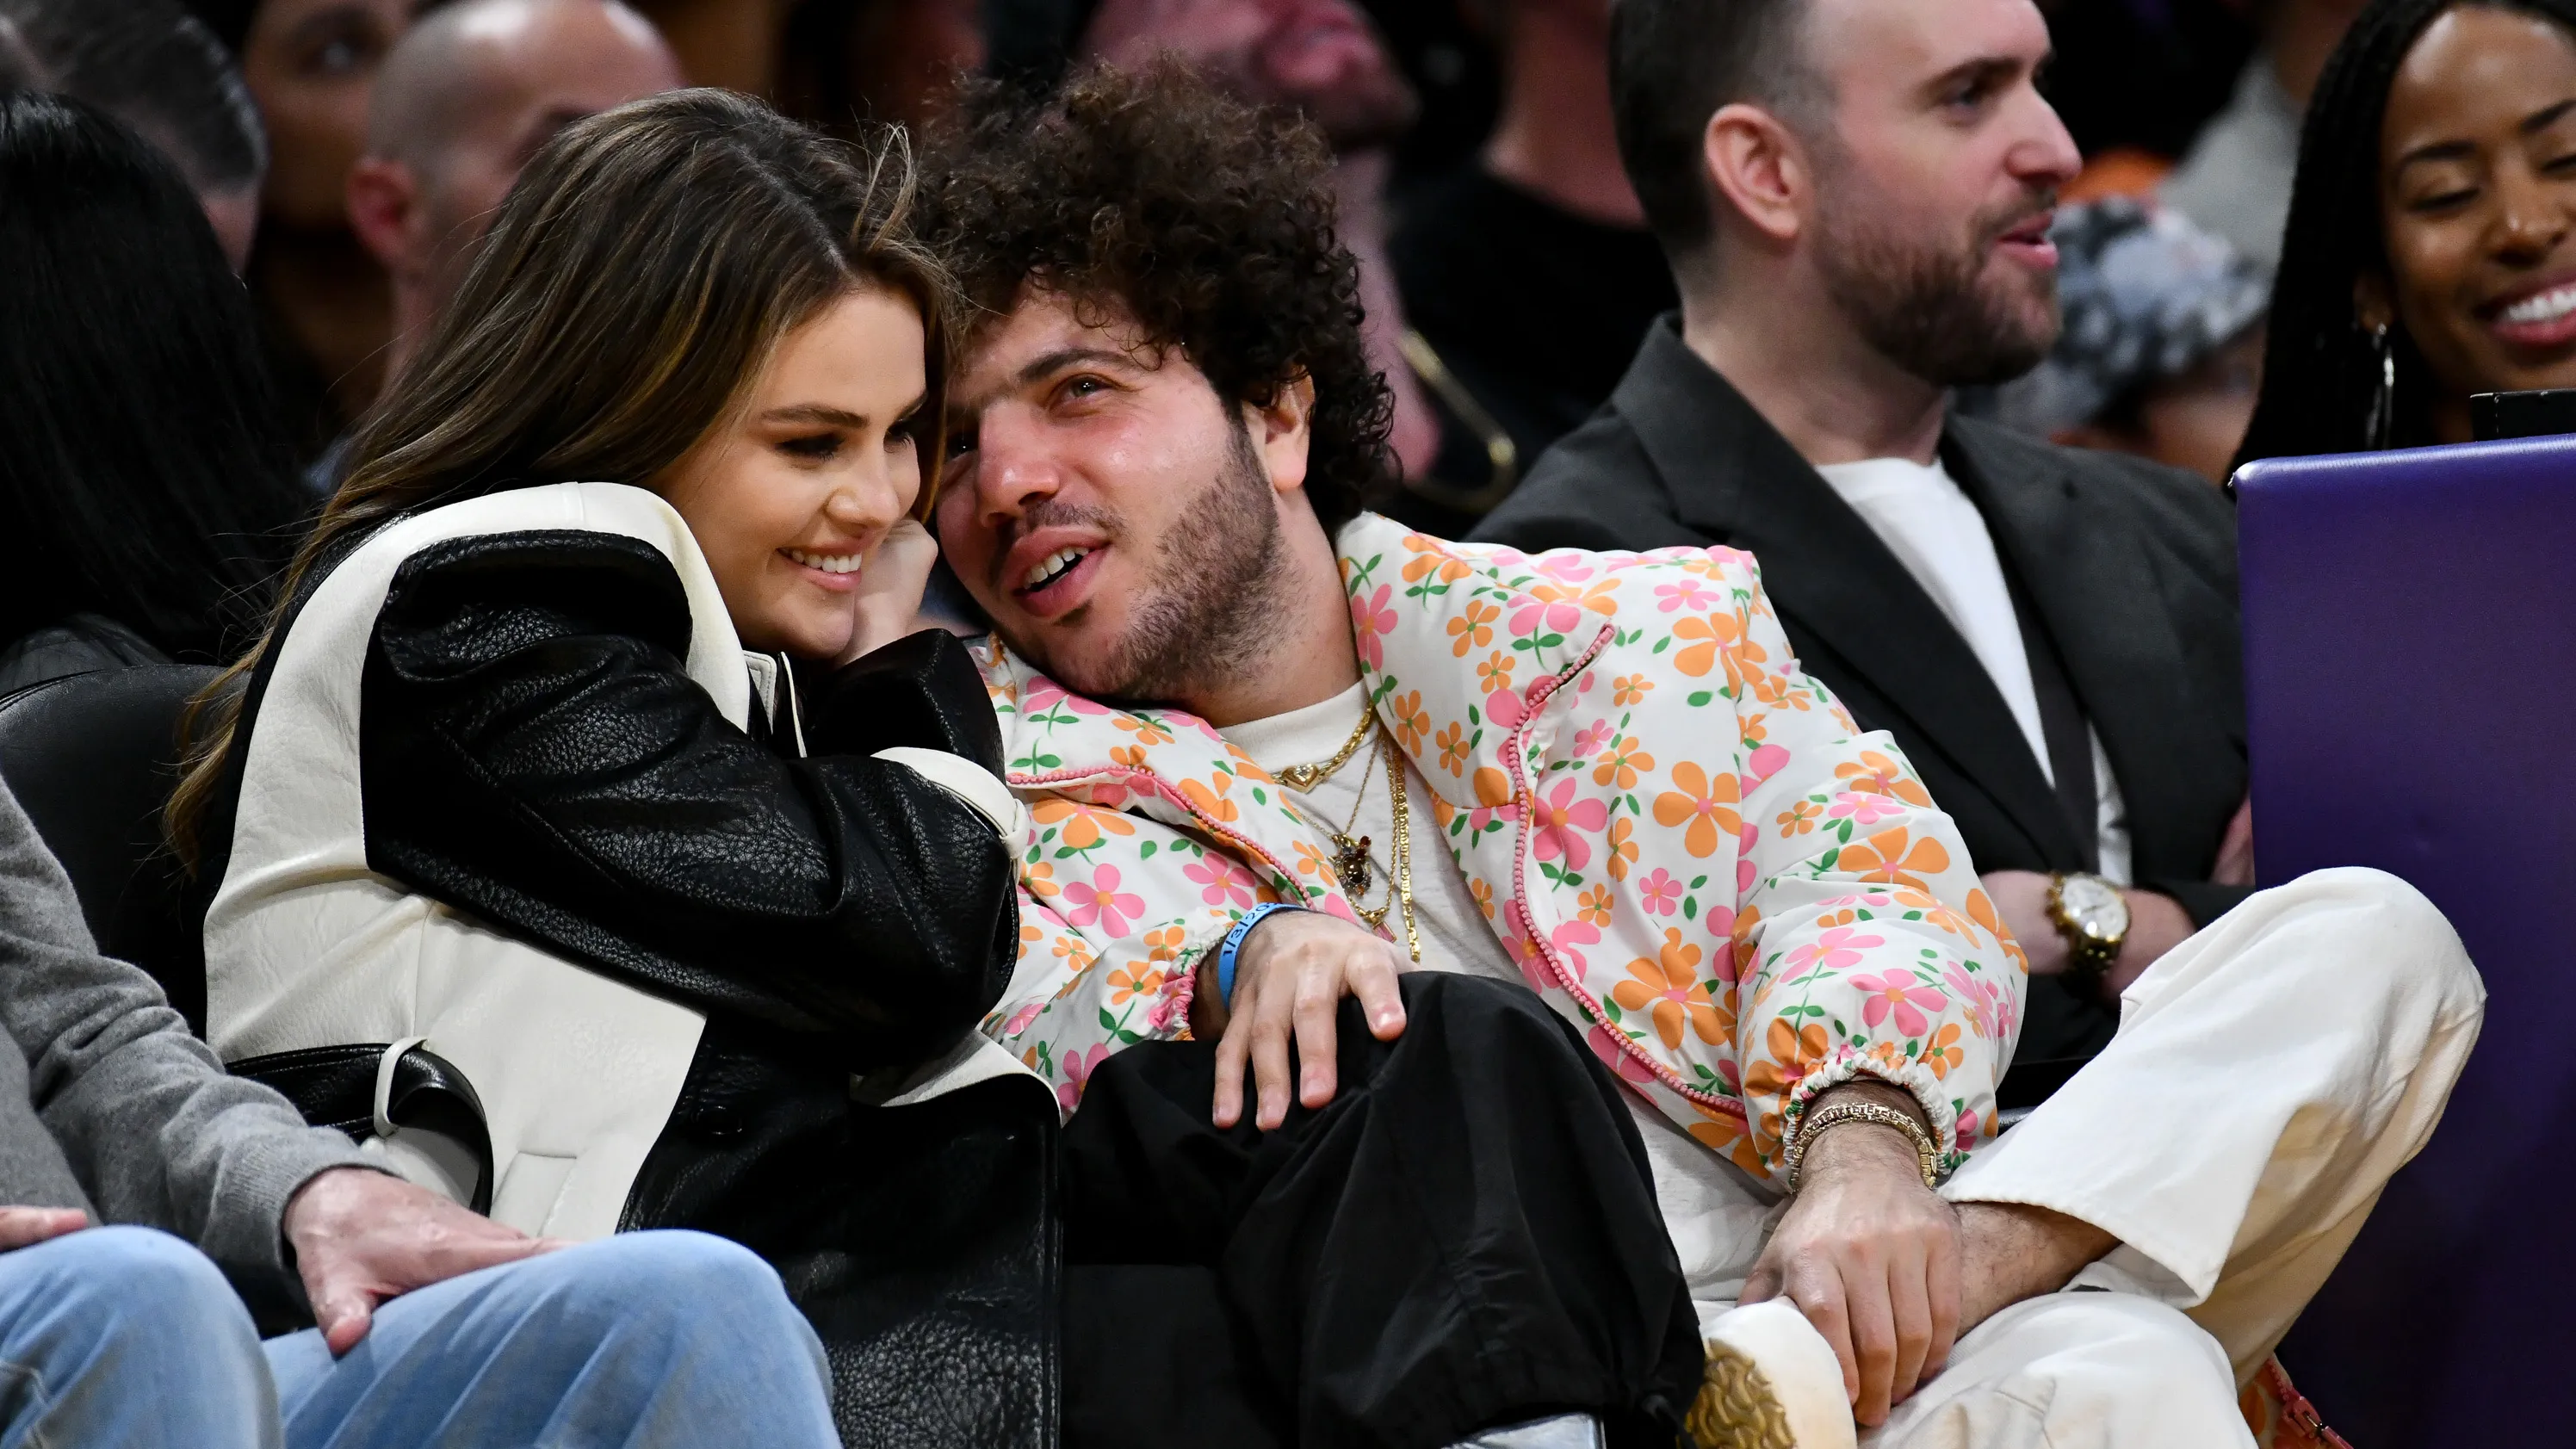 Benny Blanco And Selena Gomez’s Public Display Of Affection Sparks Controversy